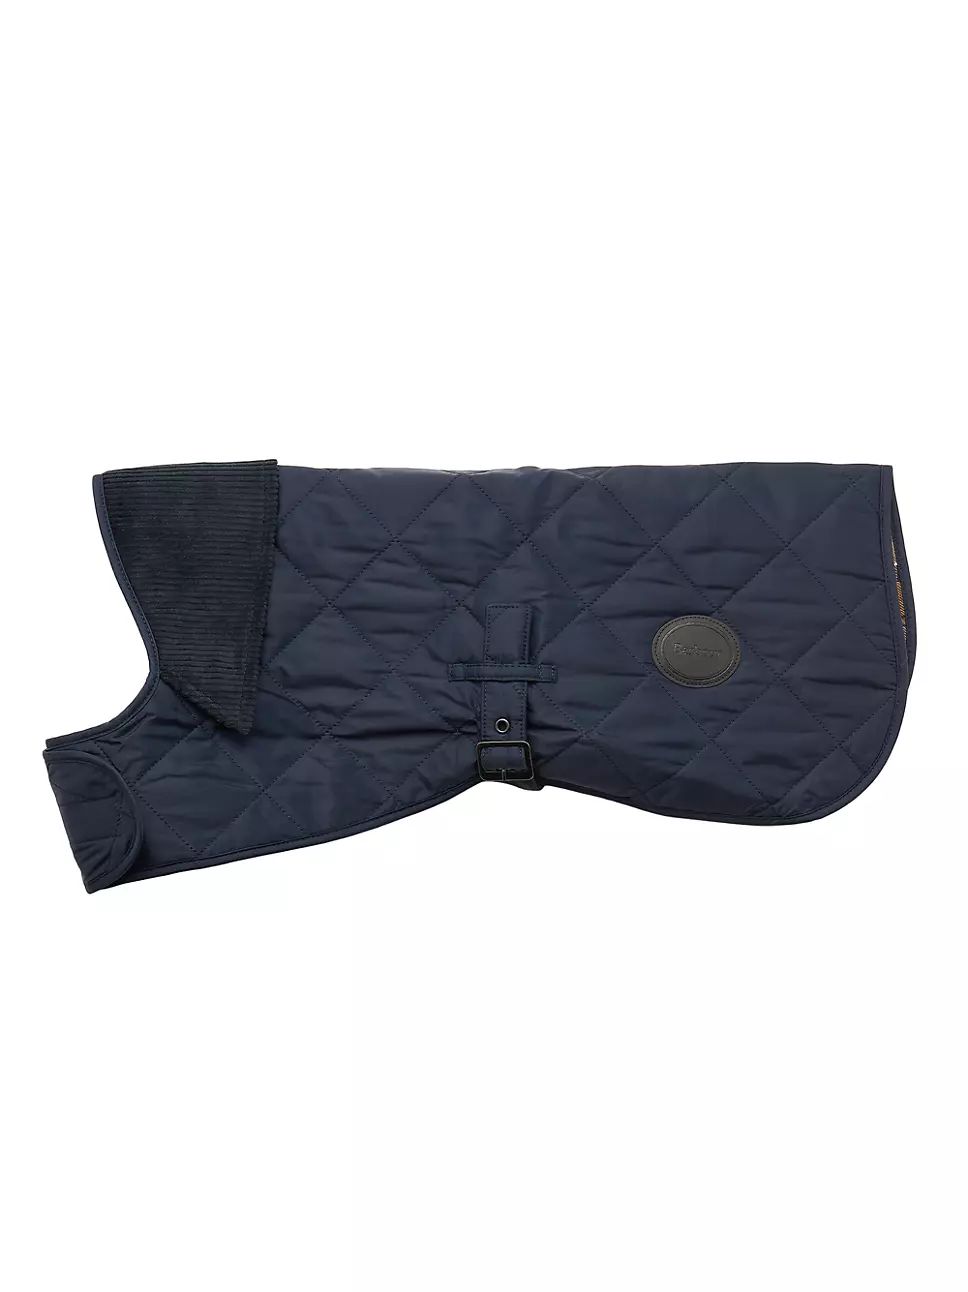 Barbour Quilted Dog Coat | Saks Fifth Avenue